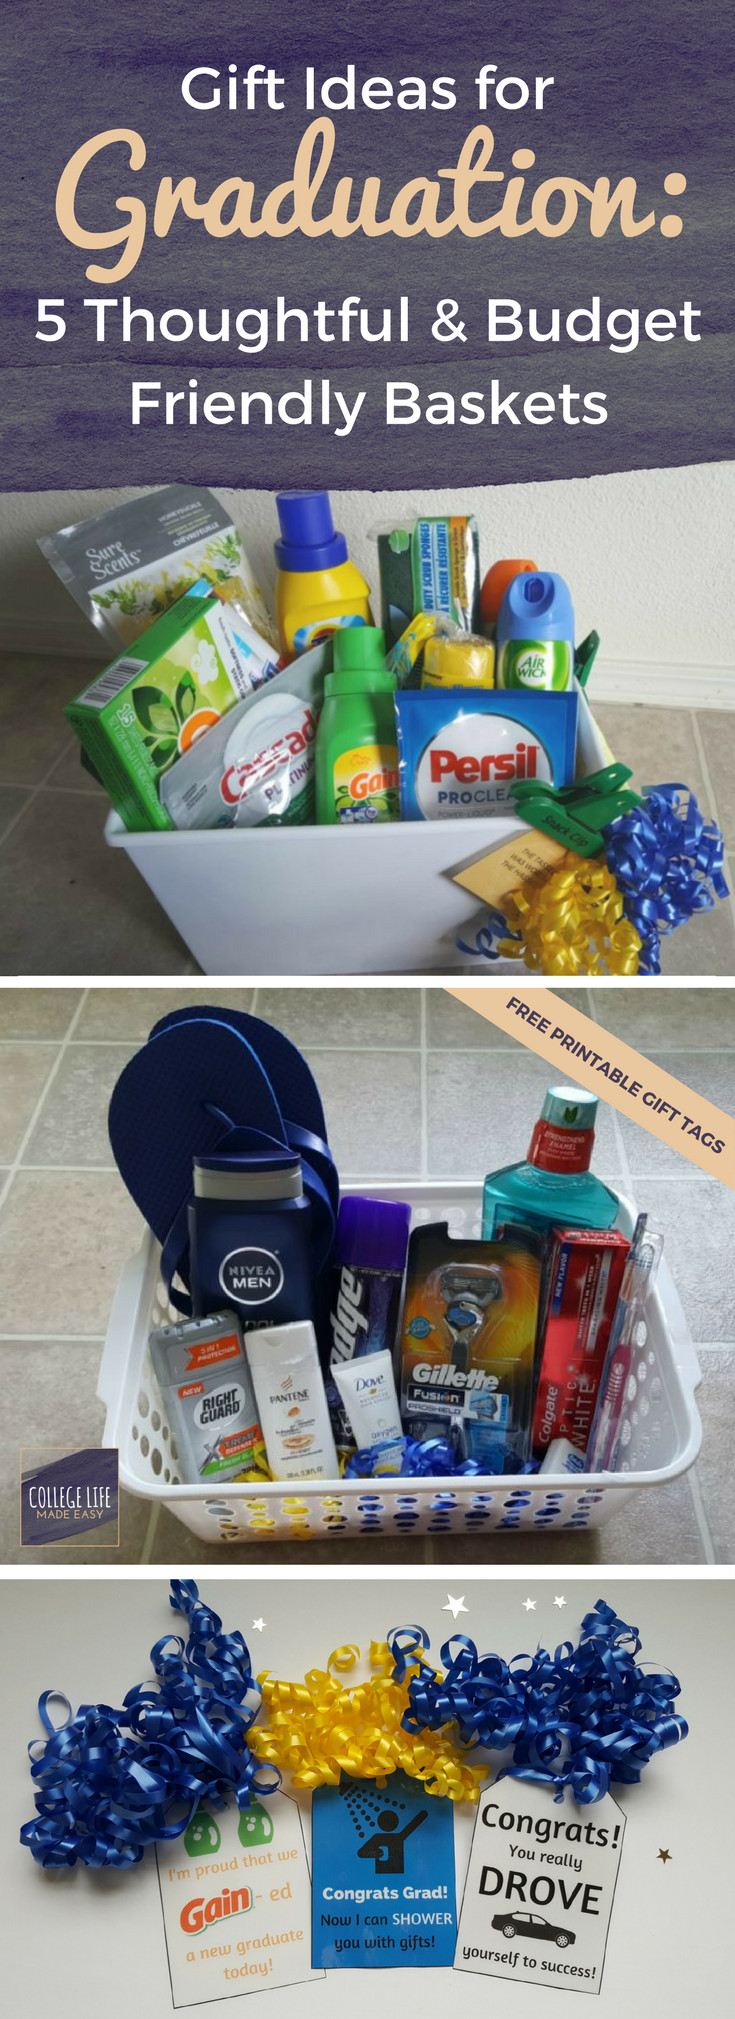 Male Graduation Gift Ideas
 5 DIY Going Away to College Gift Basket Ideas for Boys